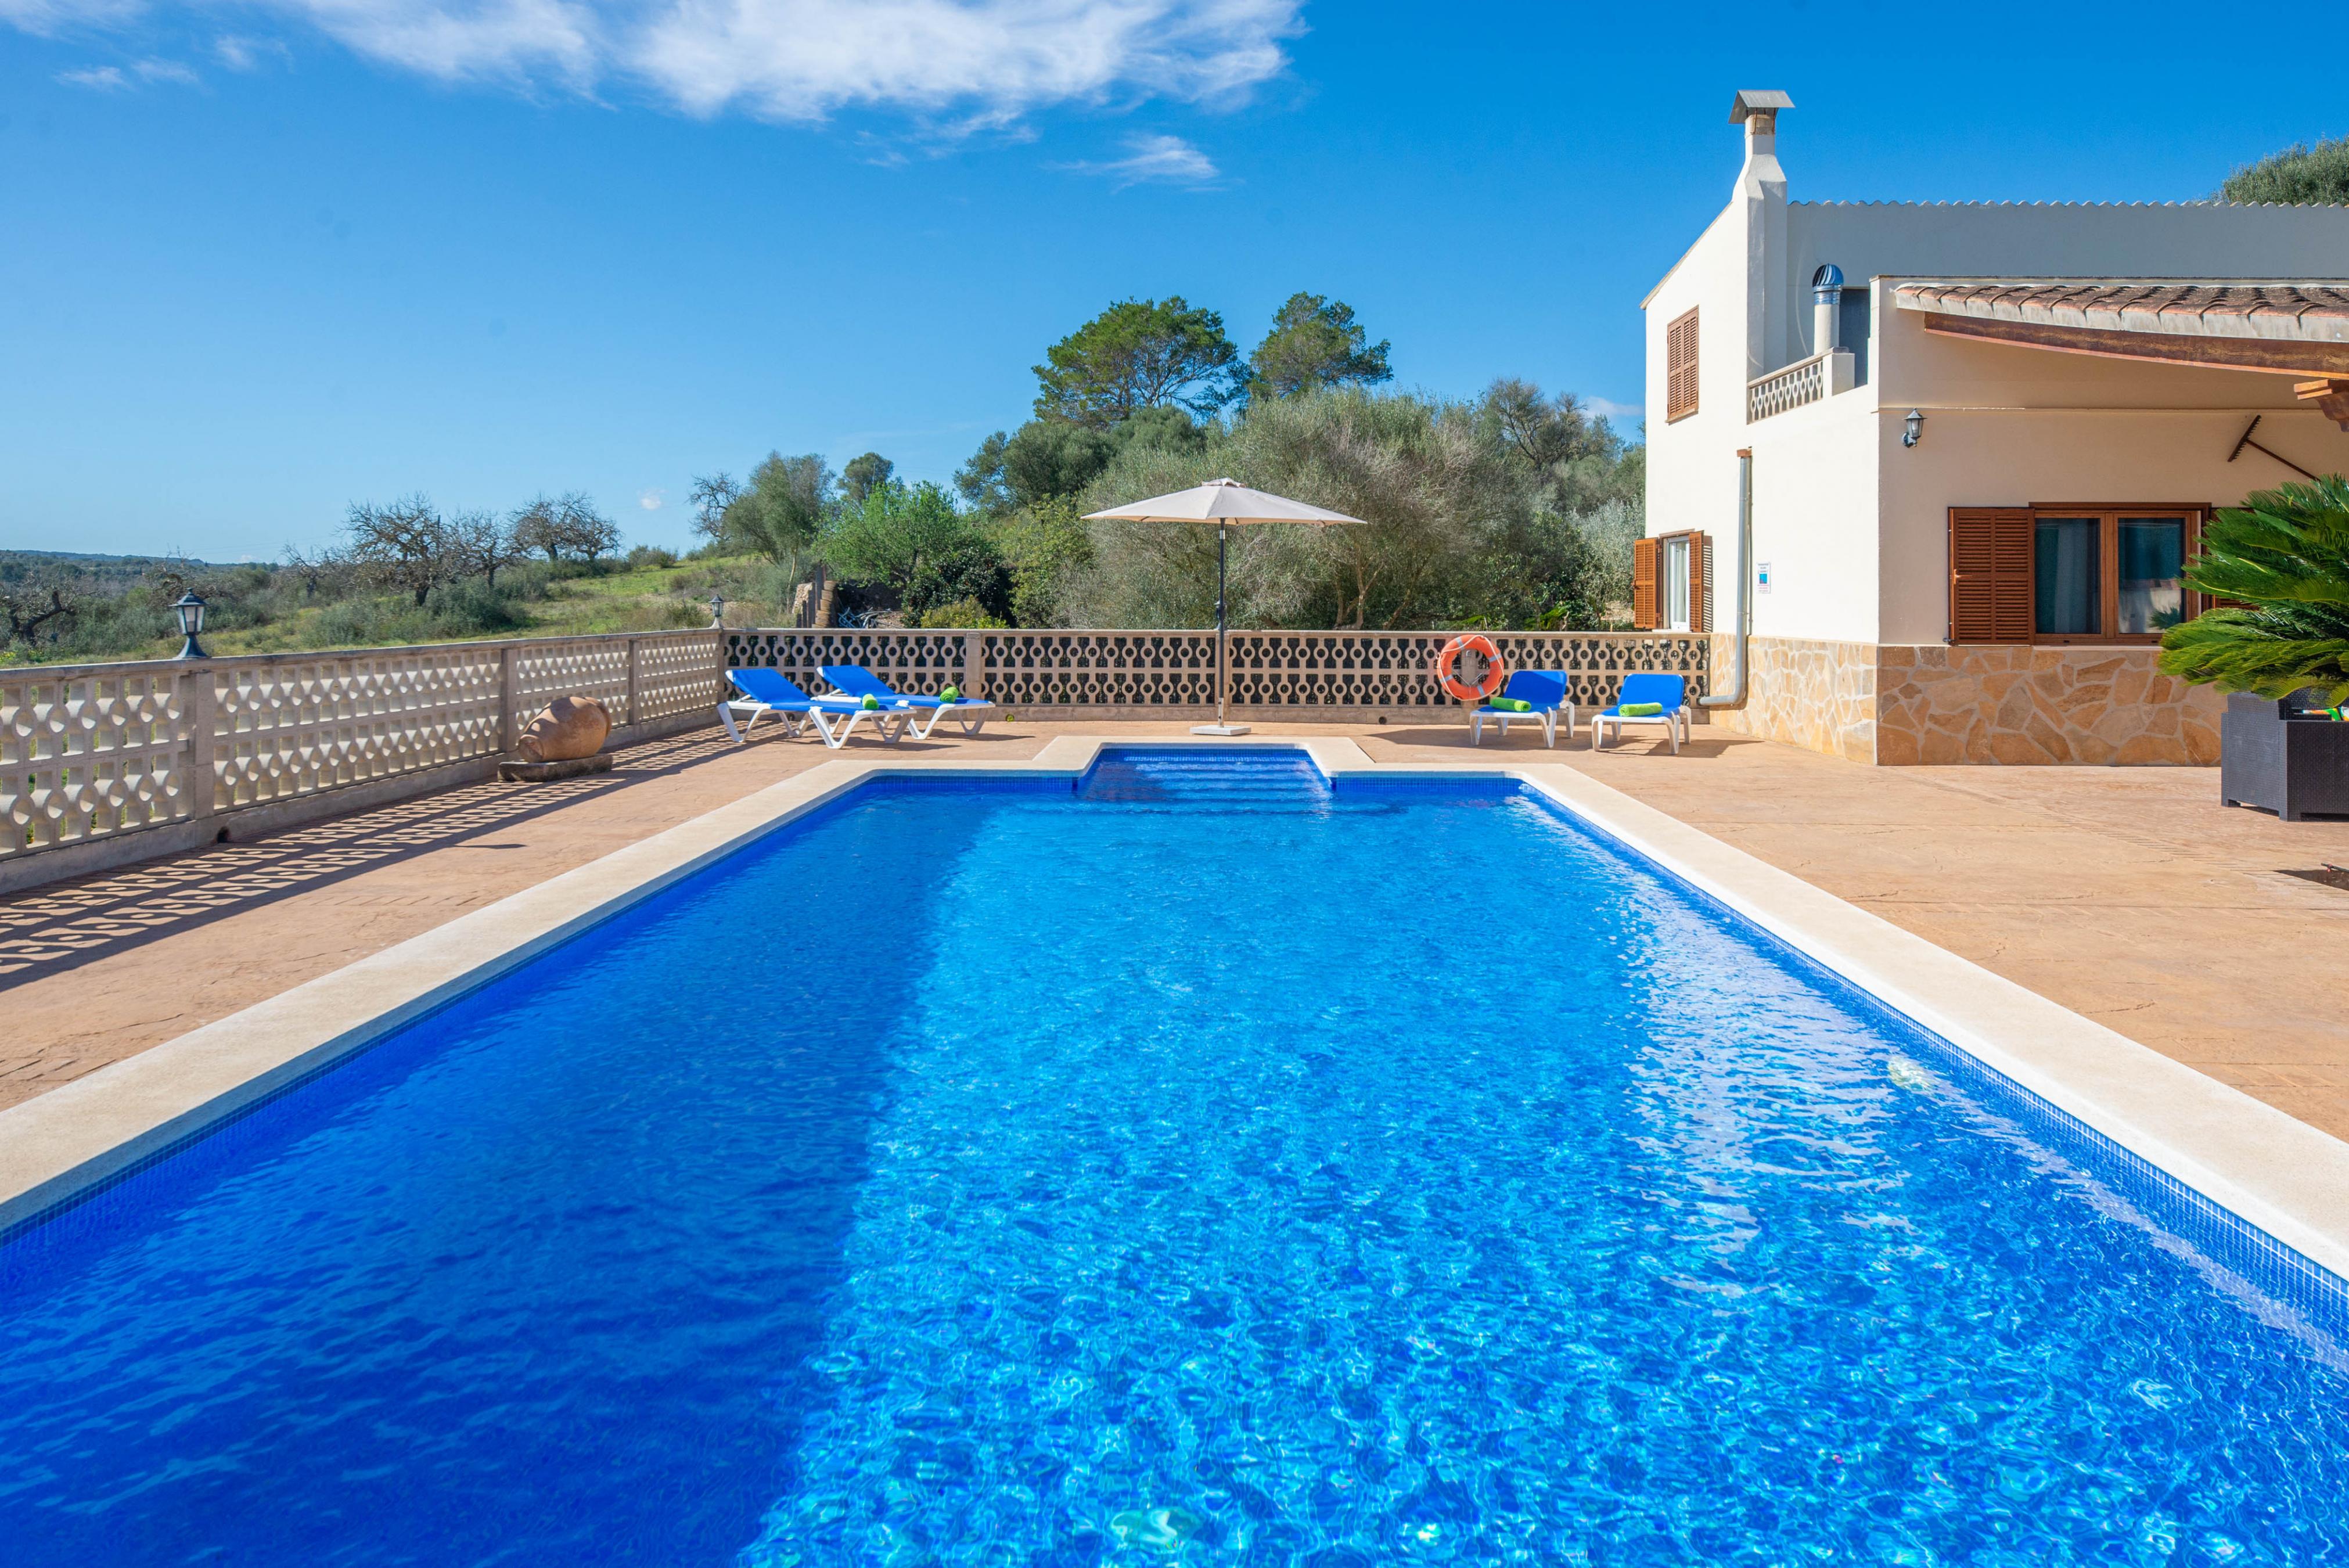 Property Image 1 - VISTA SOL - Wonderful country house with private pool and amazing views in the center of Mallorca. Free WI